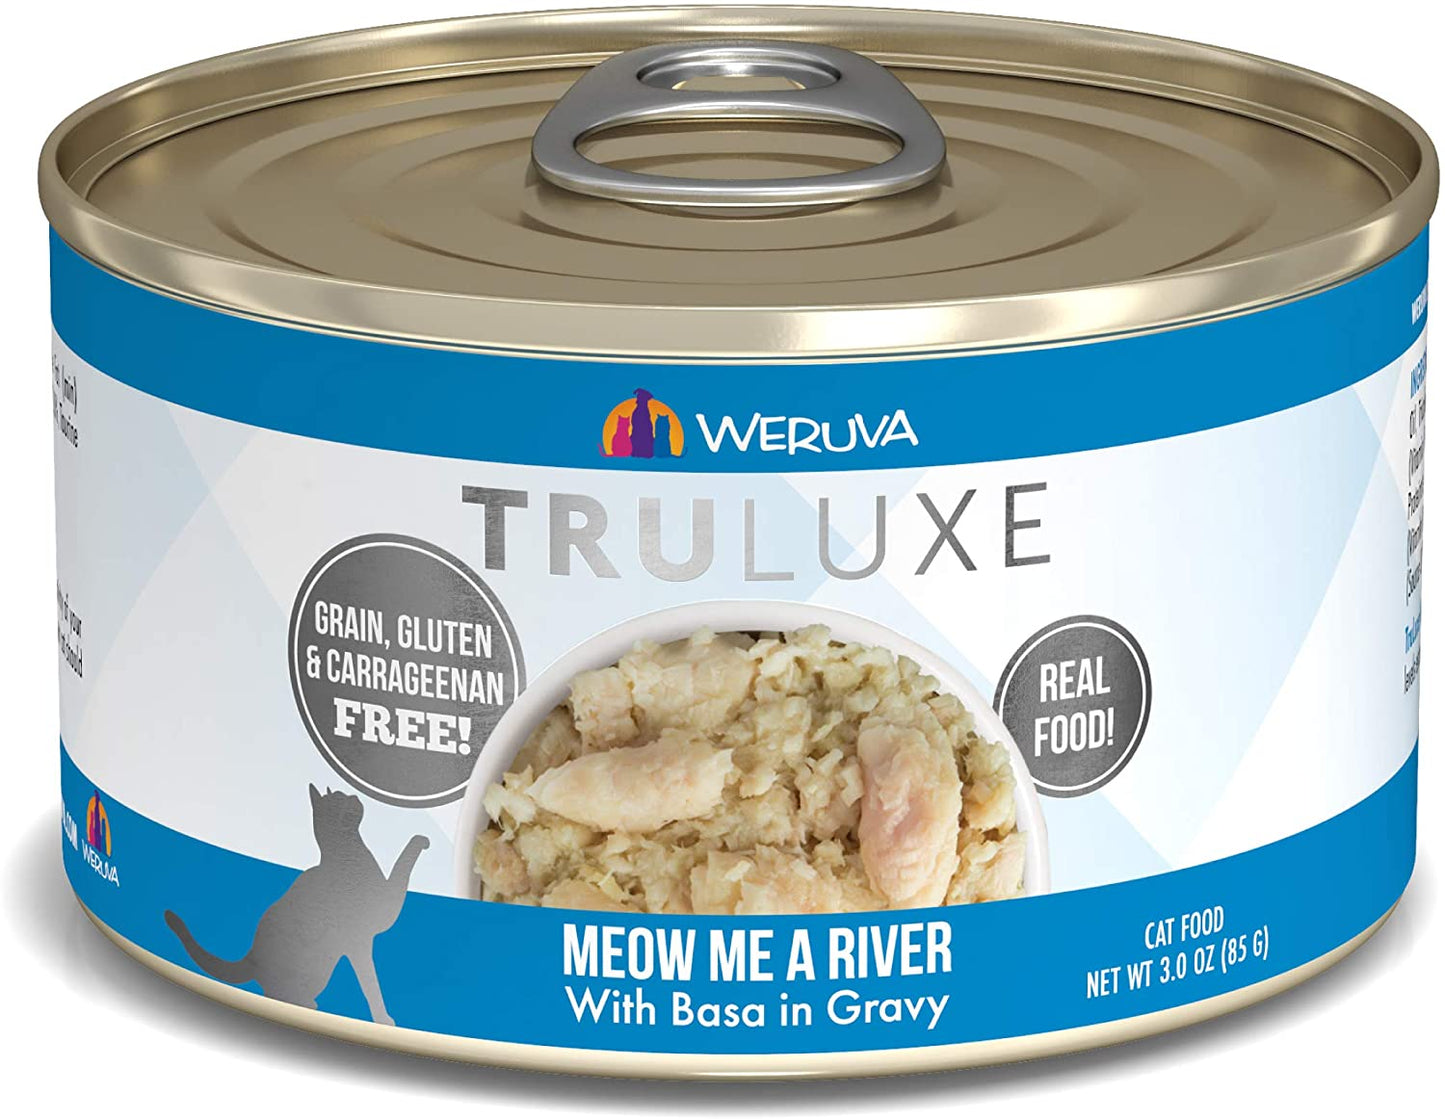 Weruva TruLuxe Meow Me A River with Basa in Gravy